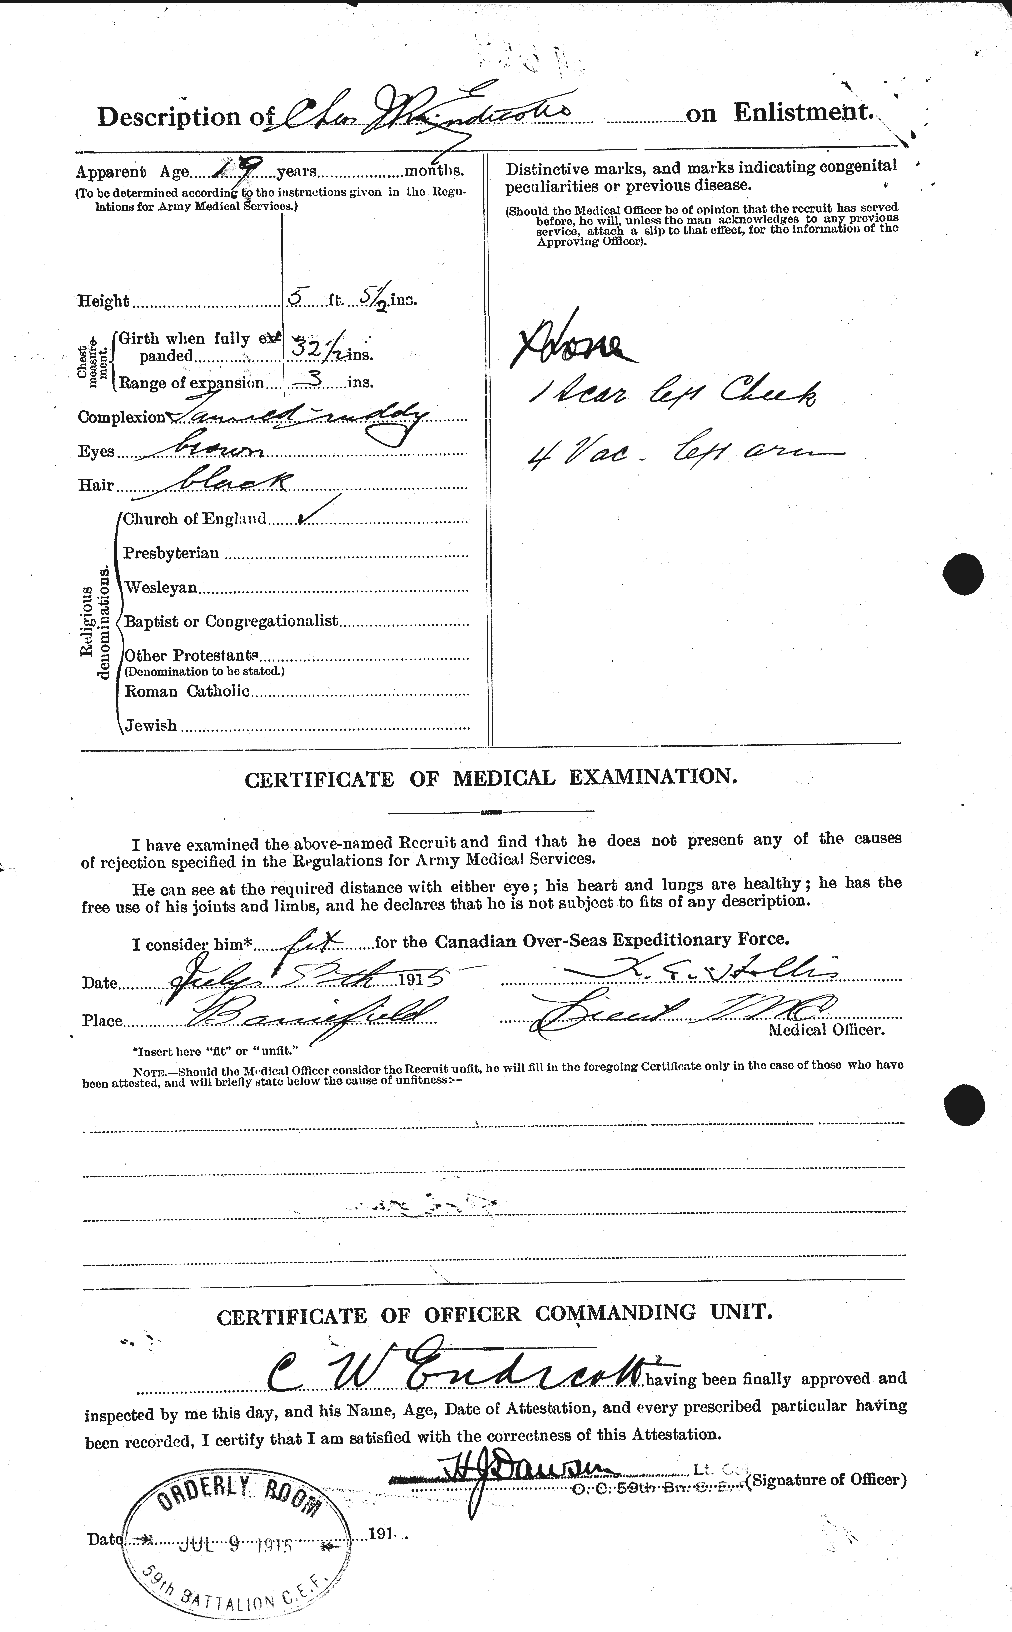 Personnel Records of the First World War - CEF 313912b